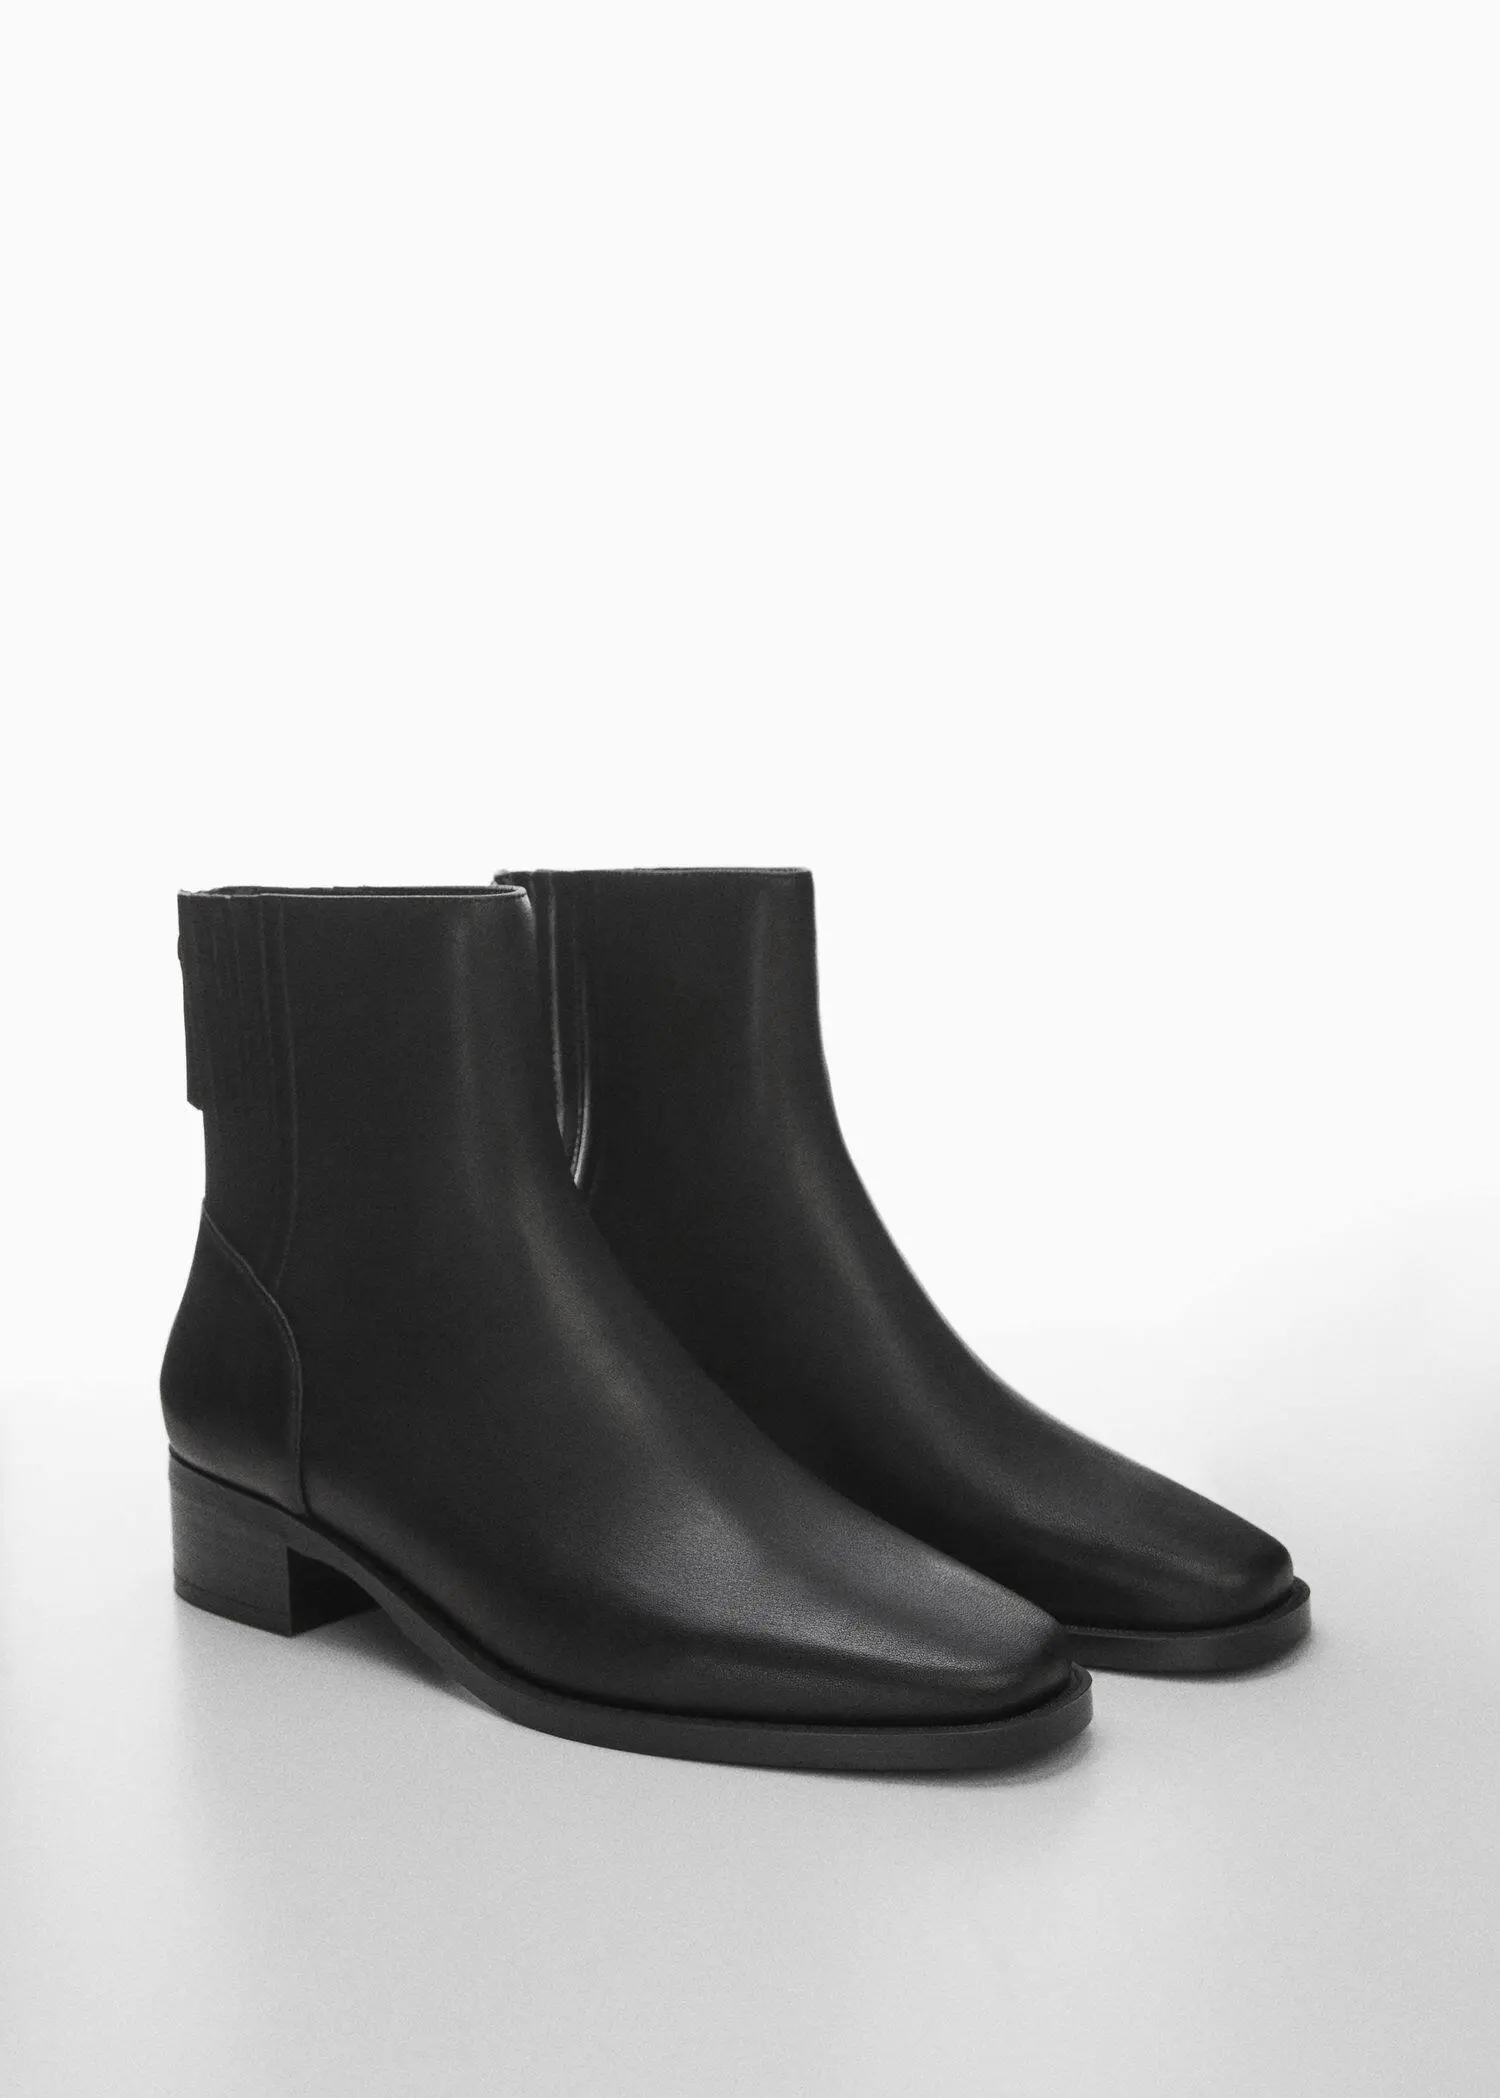 Mango Leather ankle boots with ankle zip closure. 3